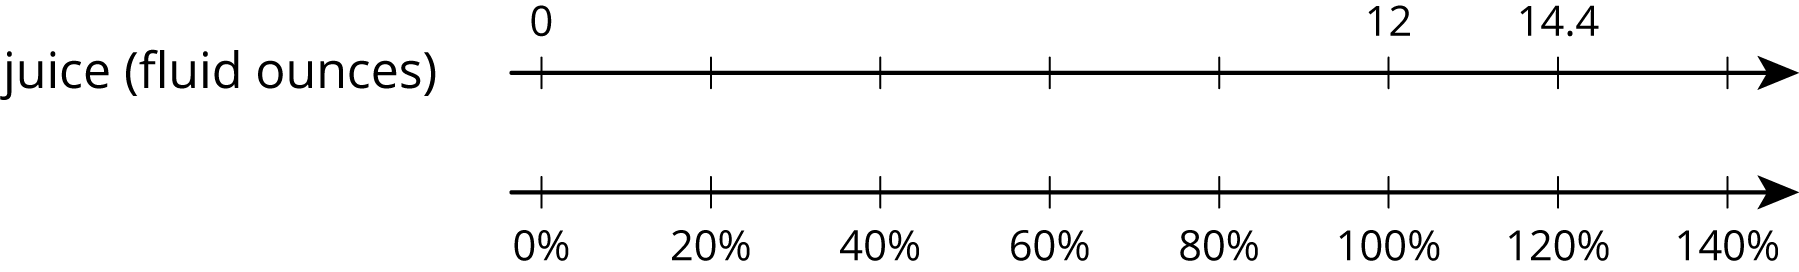 A double number line for “juice in fluid ounces” with 8 evenly spaced tick marks. The top number line, the number 0 is on the first tick mark, 12 on the sixth, and 14 point 4 on the seventh. The bottom number line, starting with the first tick mark, zero percent, 20 percent, 40 percent, 60 percent, 80 percent, 100 percent, 120 percent and 140 percent are labeled.